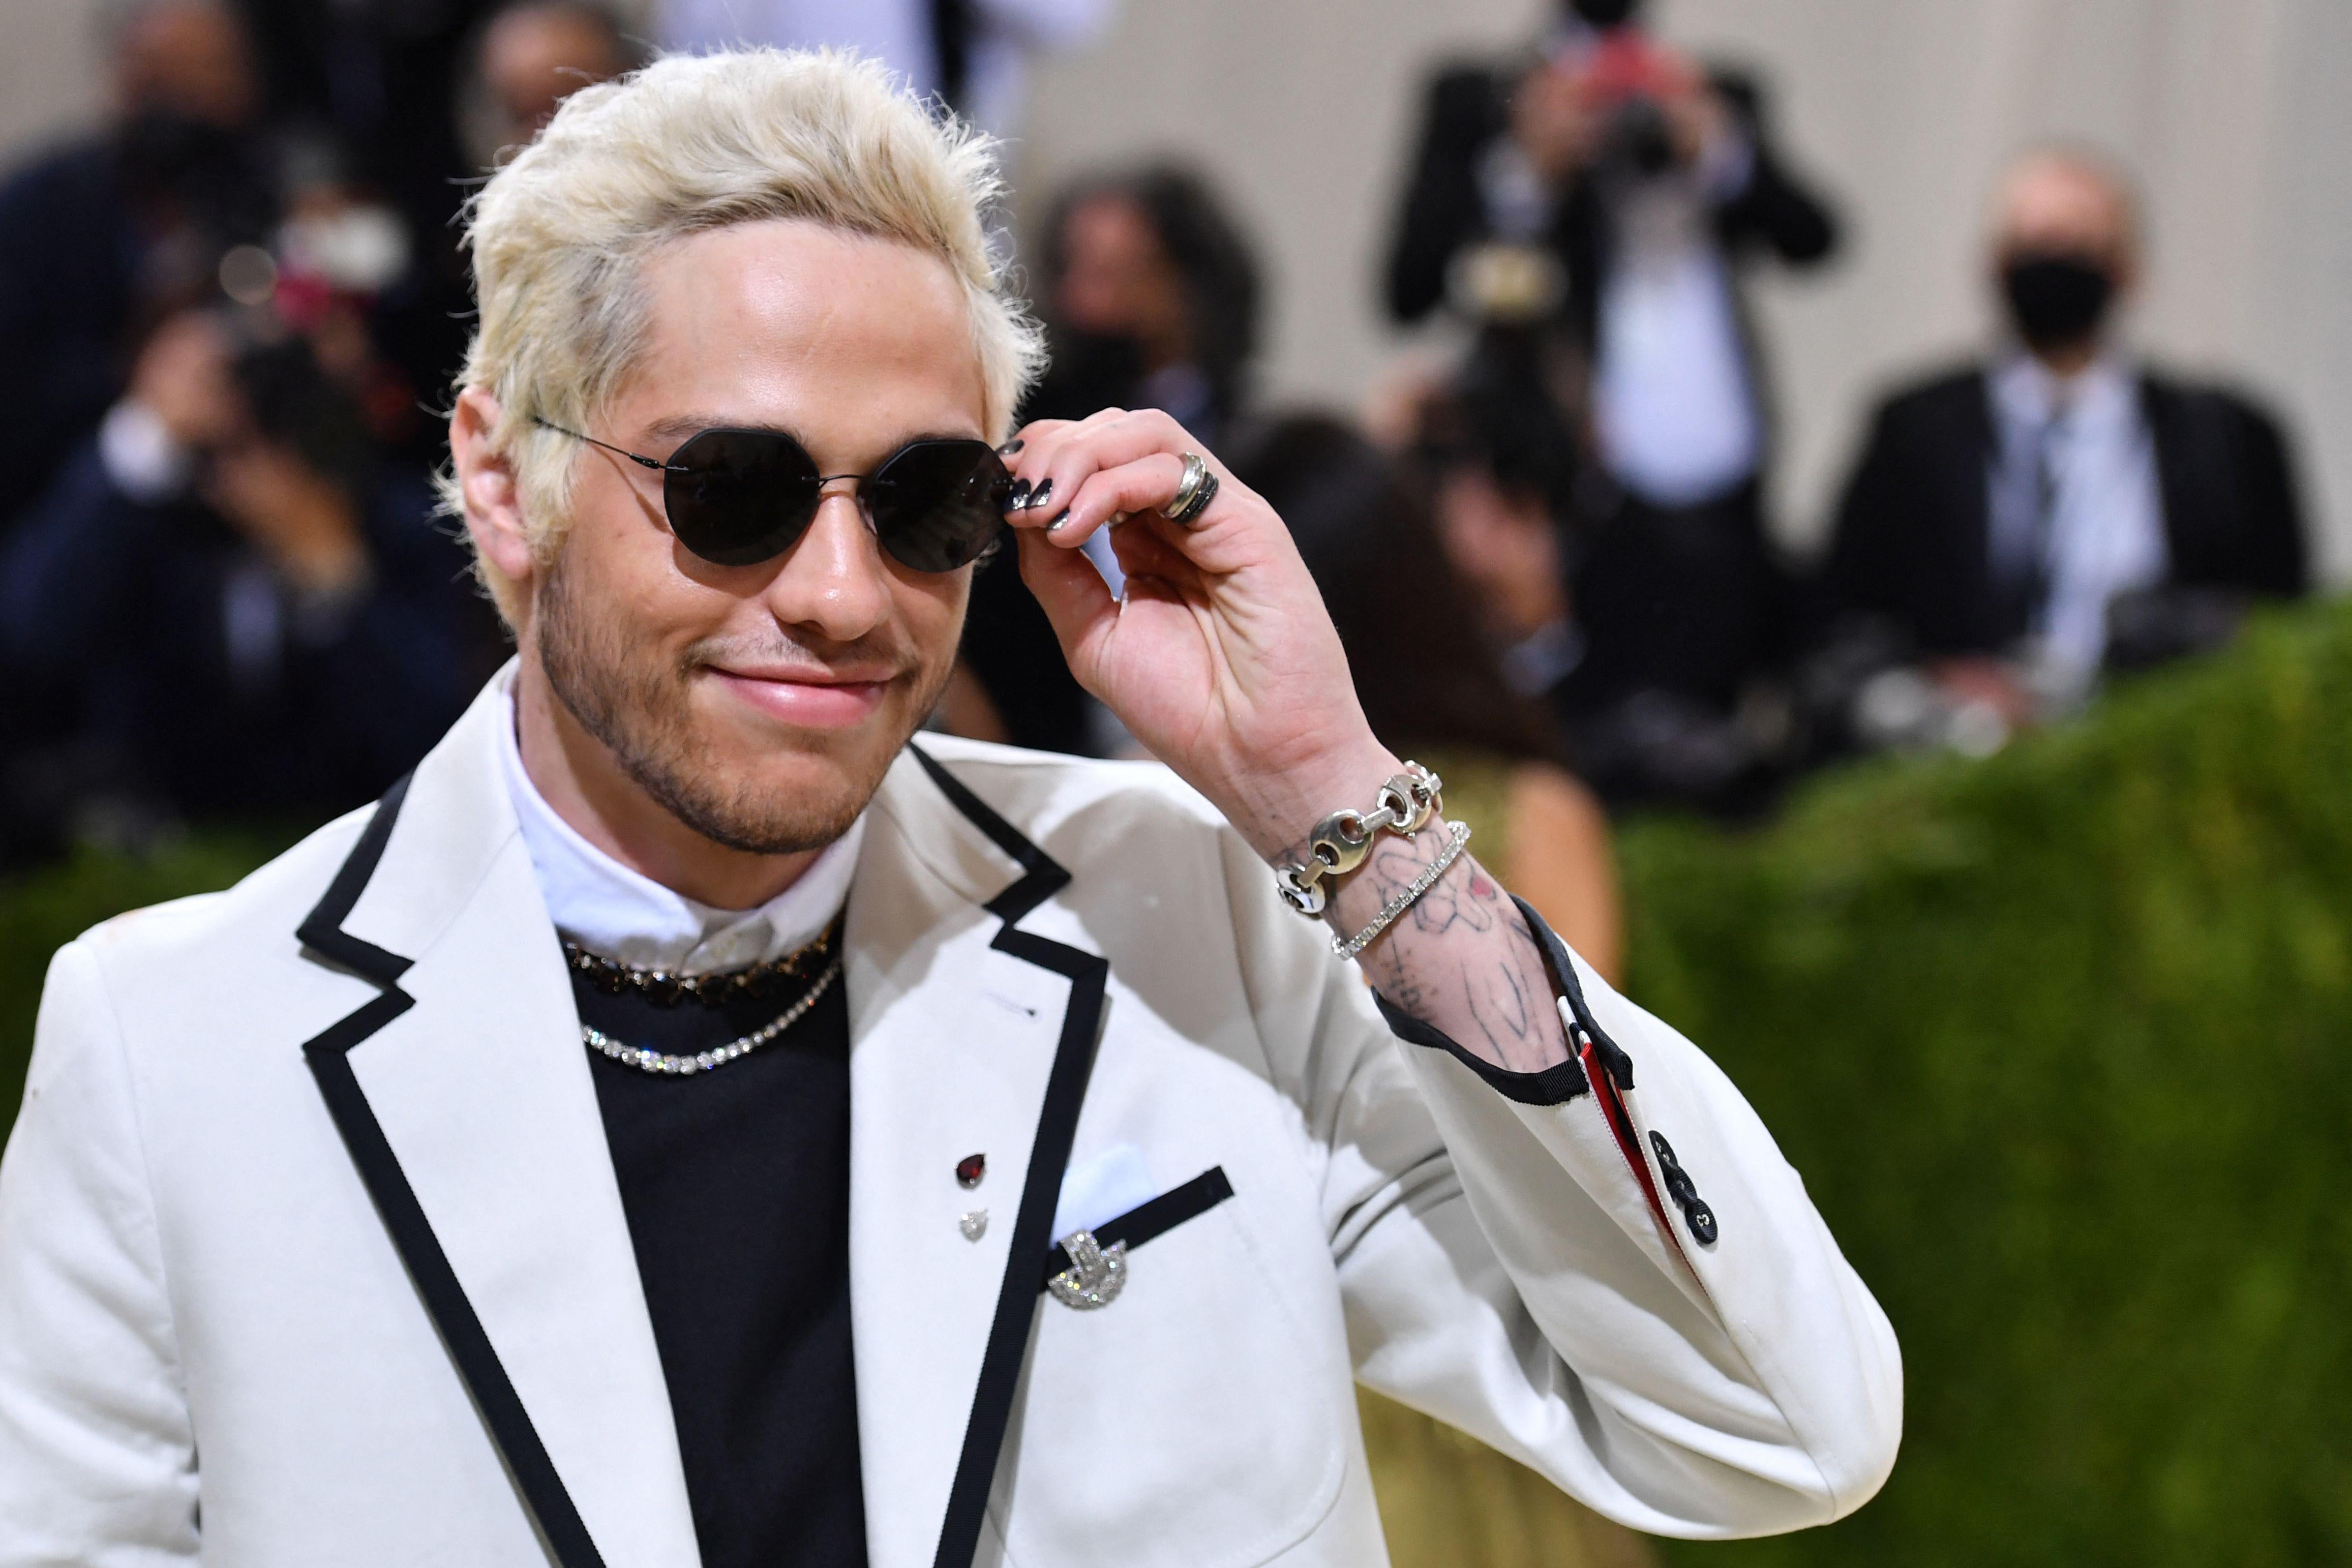 US actor-comedian Pete Davidson arrives for the 2021 Met Gala at the Metropolitan Museum of Art on September 13, 2021 in New York. - This year's Met Gala has a distinctively youthful imprint, hosted by singer Billie Eilish, actor Timothee Chalamet, poet Amanda Gorman and tennis star Naomi Osaka, none of them older than 25. The 2021 theme is "In America: A Lexicon of Fashion." (Photo by Angela WEISS / AFP) (Photo by ANGELA WEISS/AFP via Getty Images)